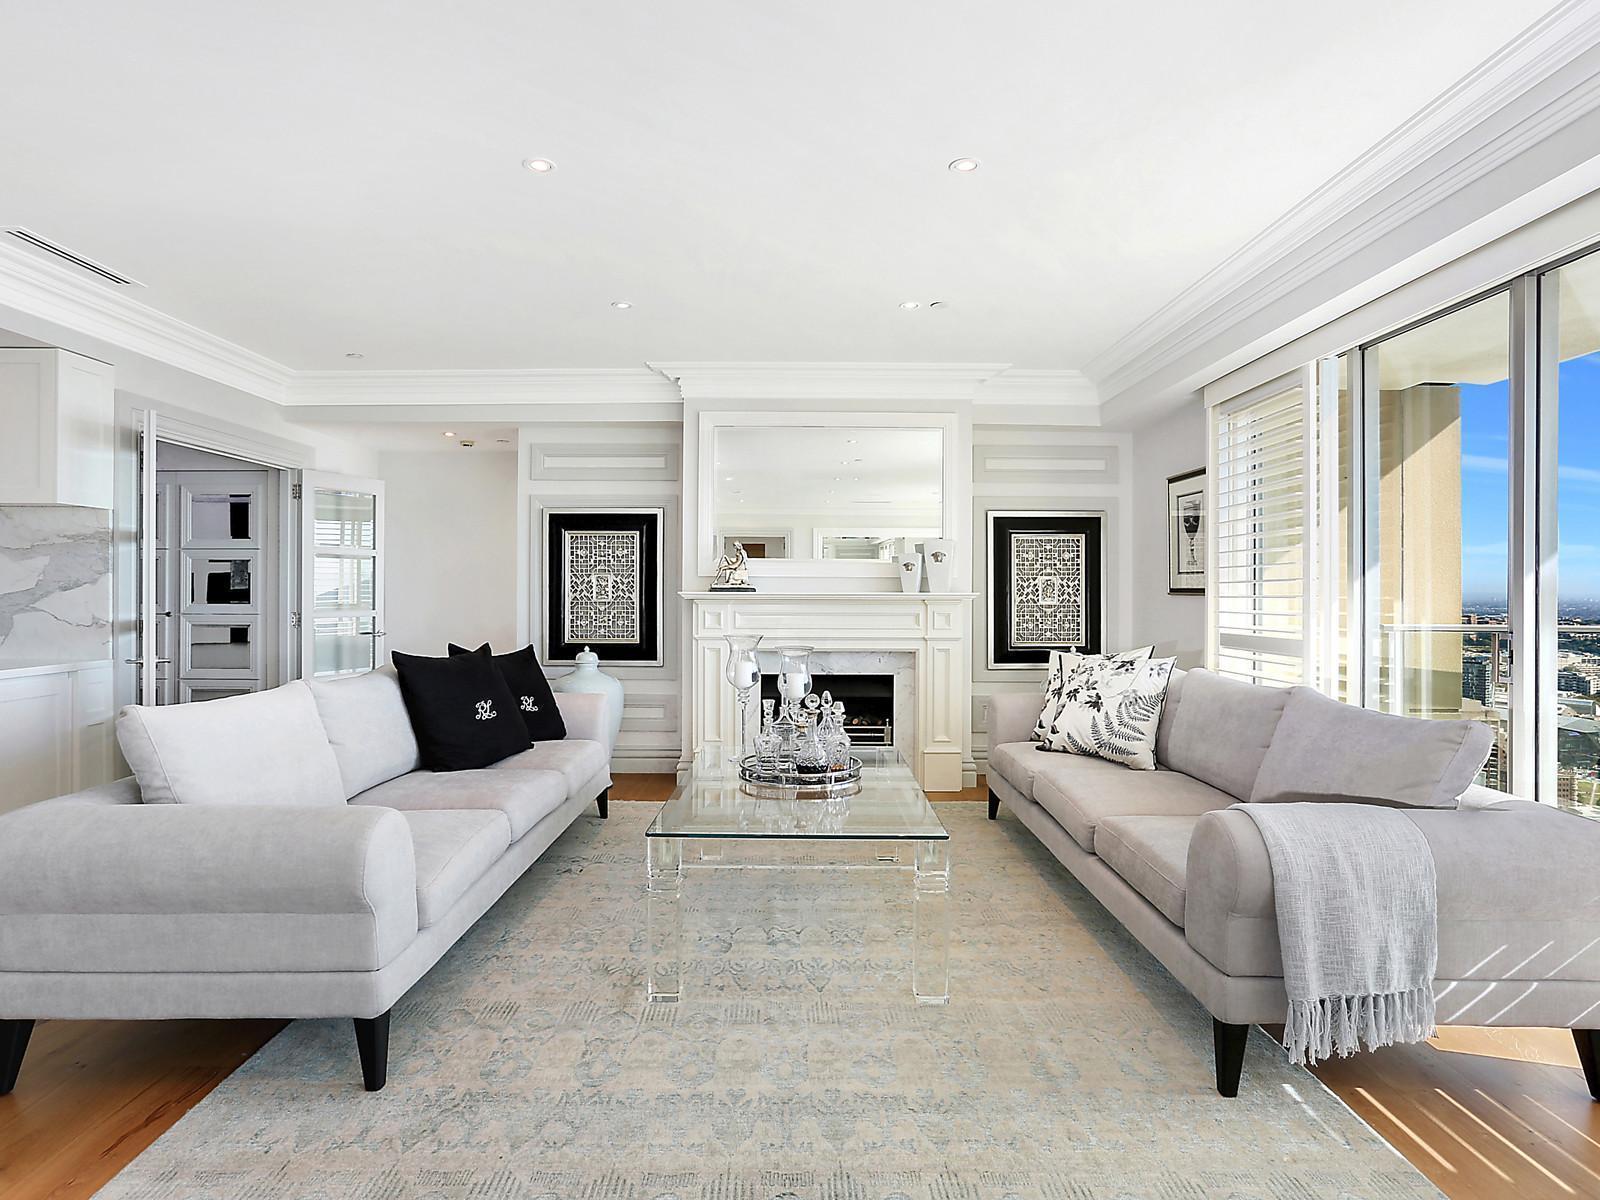 Why Hamptons Style Furniture Is The Ultimate Choice For Your Dream Home?